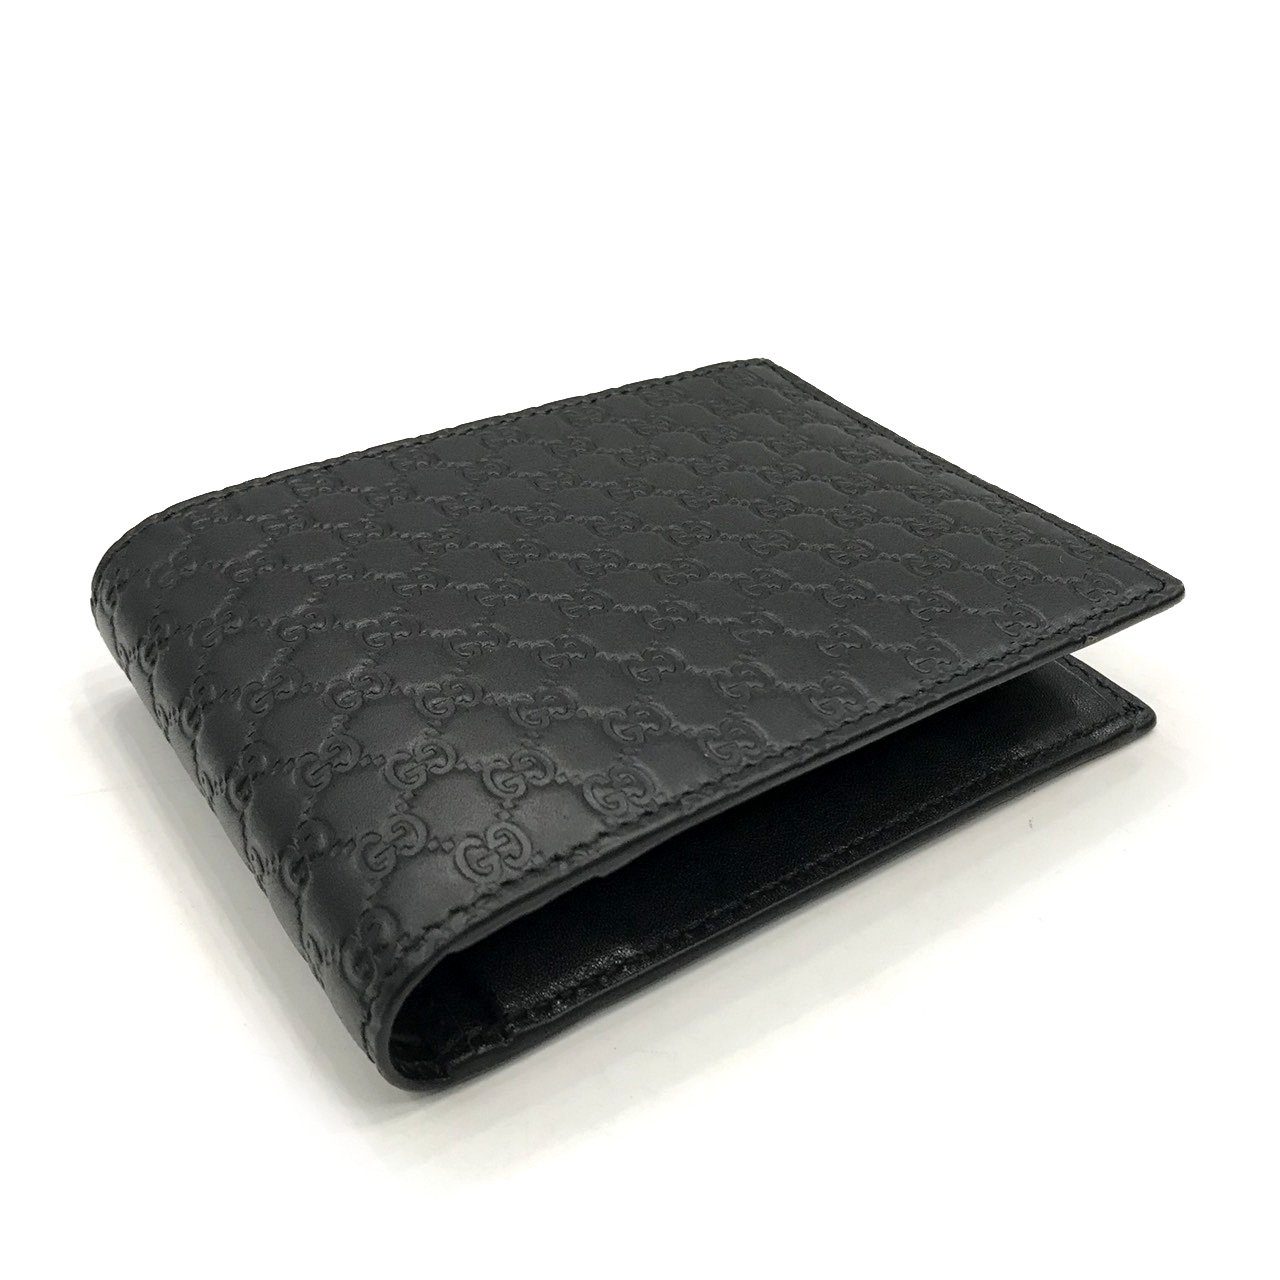 New Gucci GG Men's Wallet in Black Leather